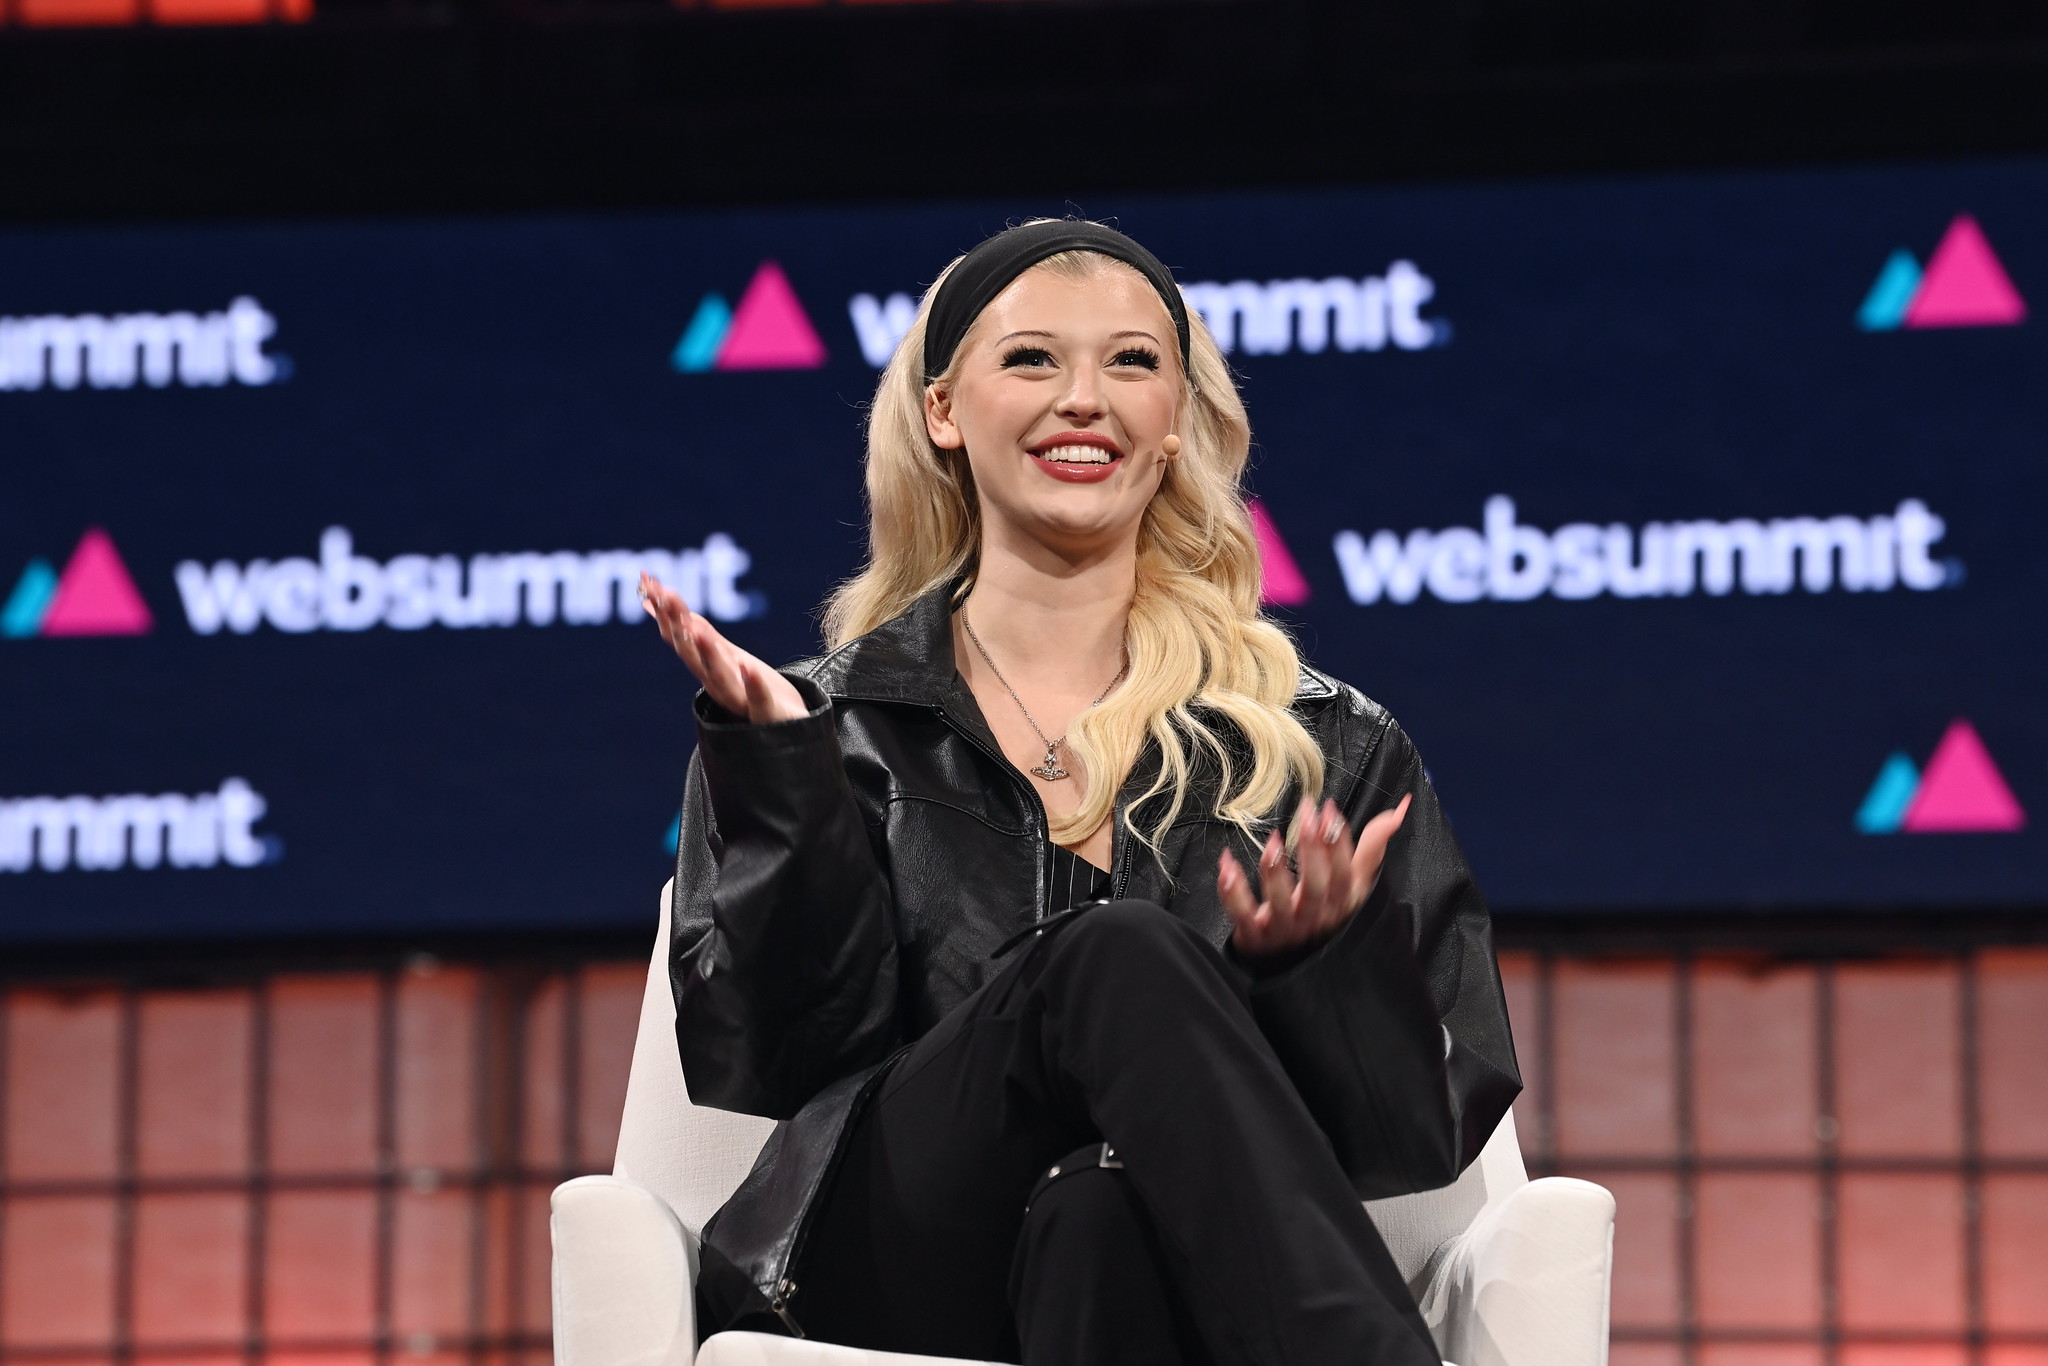 Loren Gray, Social Media Personality & Songwriter, on Centre Stage during day one of Web Summit 2023 at the Altice Arena in Lisbon, Portugal.